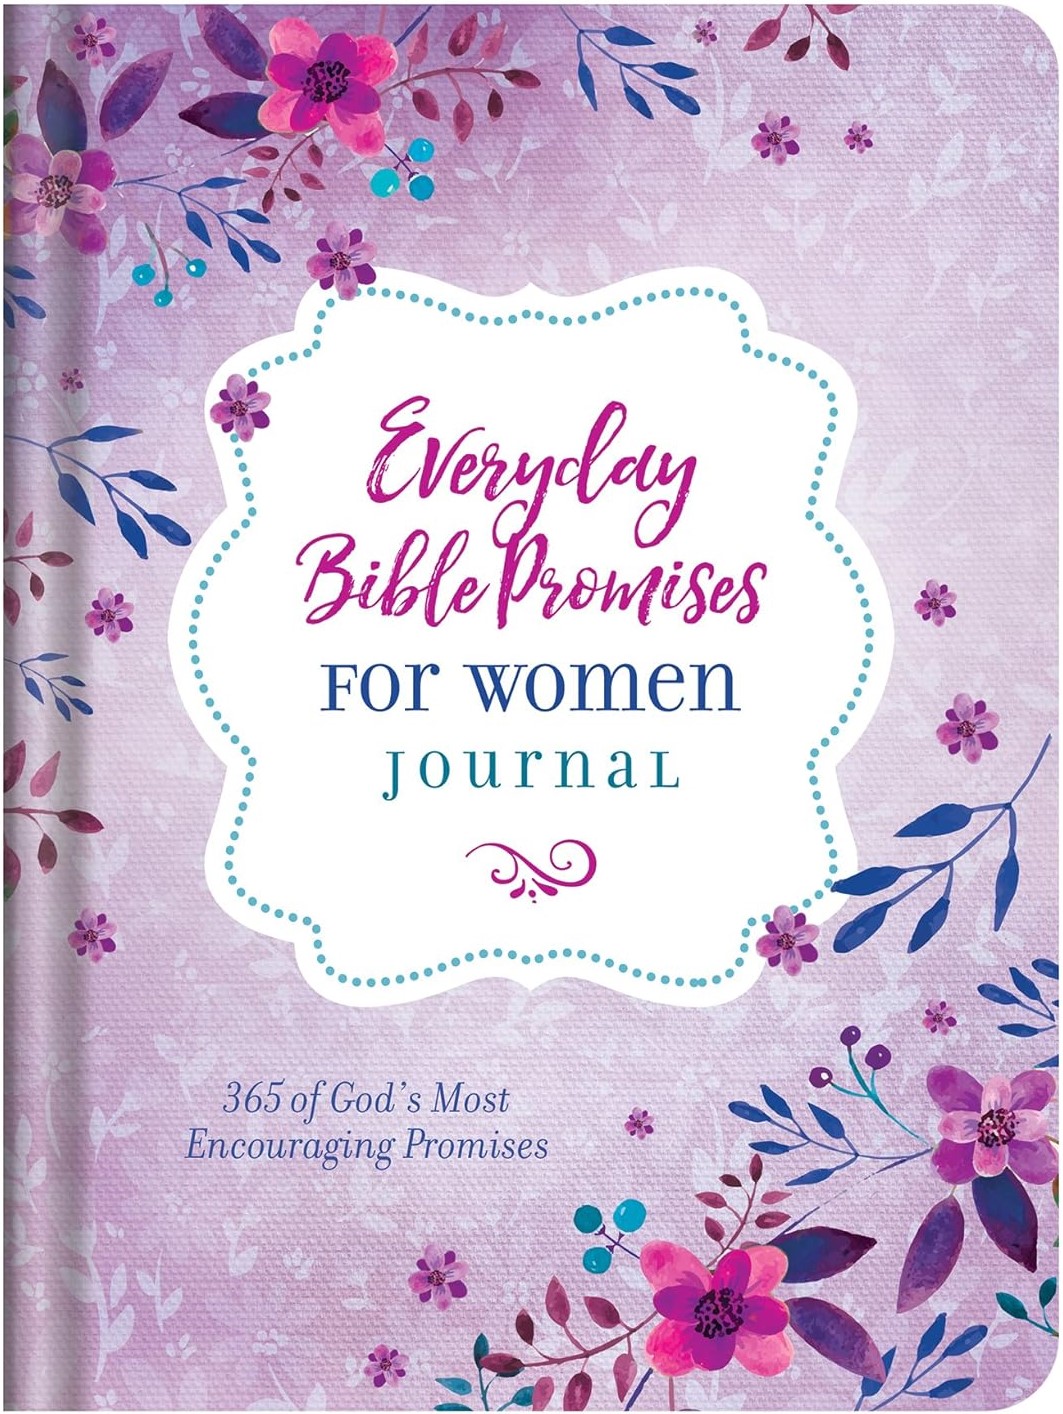 Everyday Bible Promises for Women Journal: 365 of God's Most Encouraging Promises